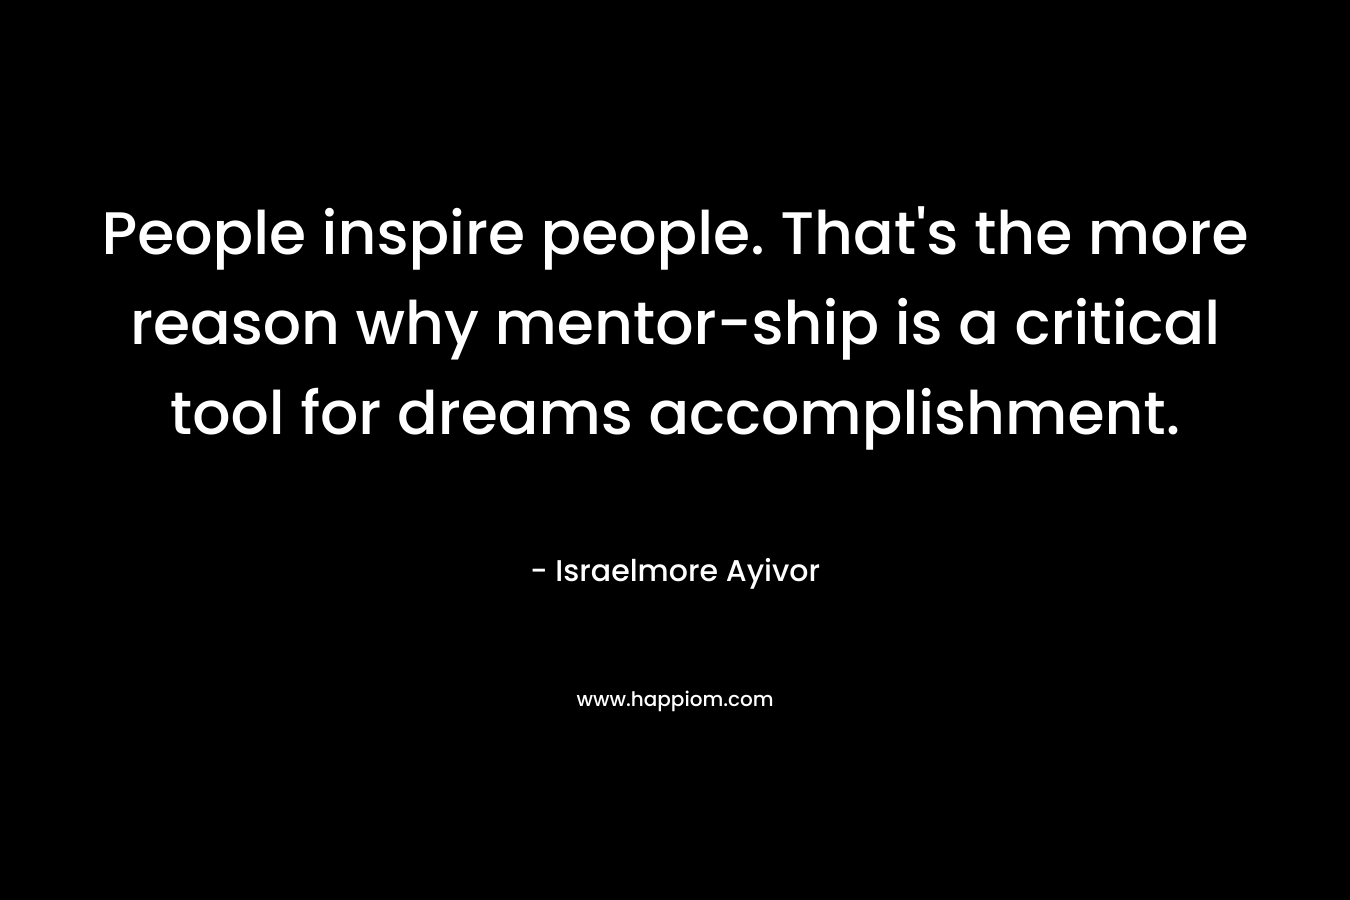 People inspire people. That’s the more reason why mentor-ship is a critical tool for dreams accomplishment. – Israelmore Ayivor